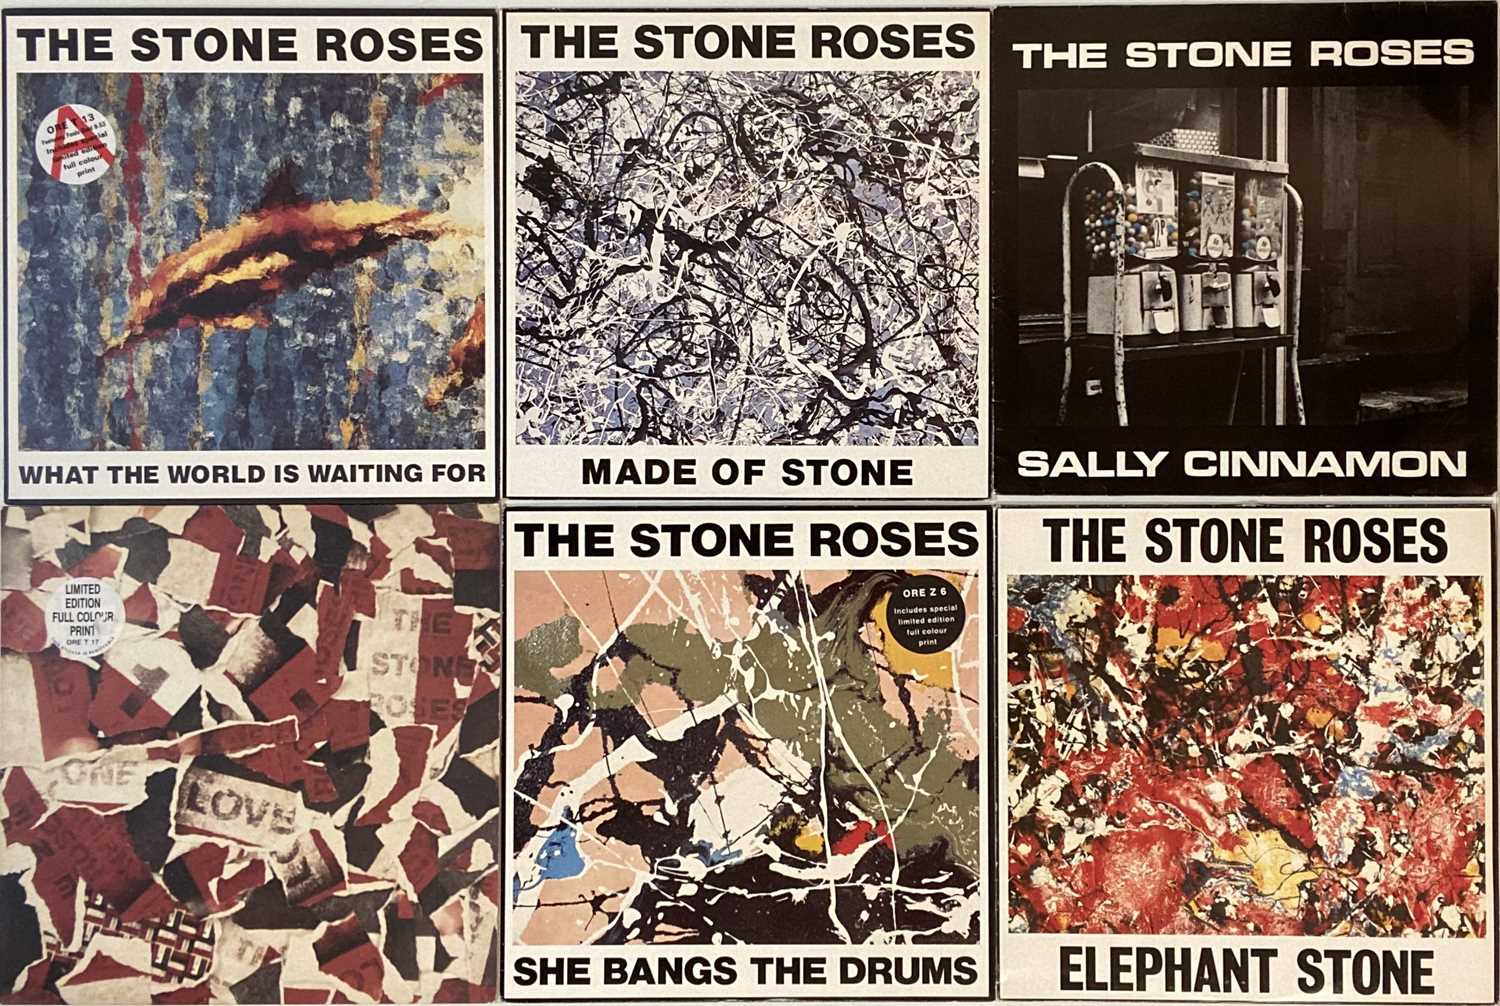 Lot 306 - THE STONE ROSES - 12" SINGLES (ORIGINAL/EARLY UK COPIES WITH PRINTS INCLUDED)